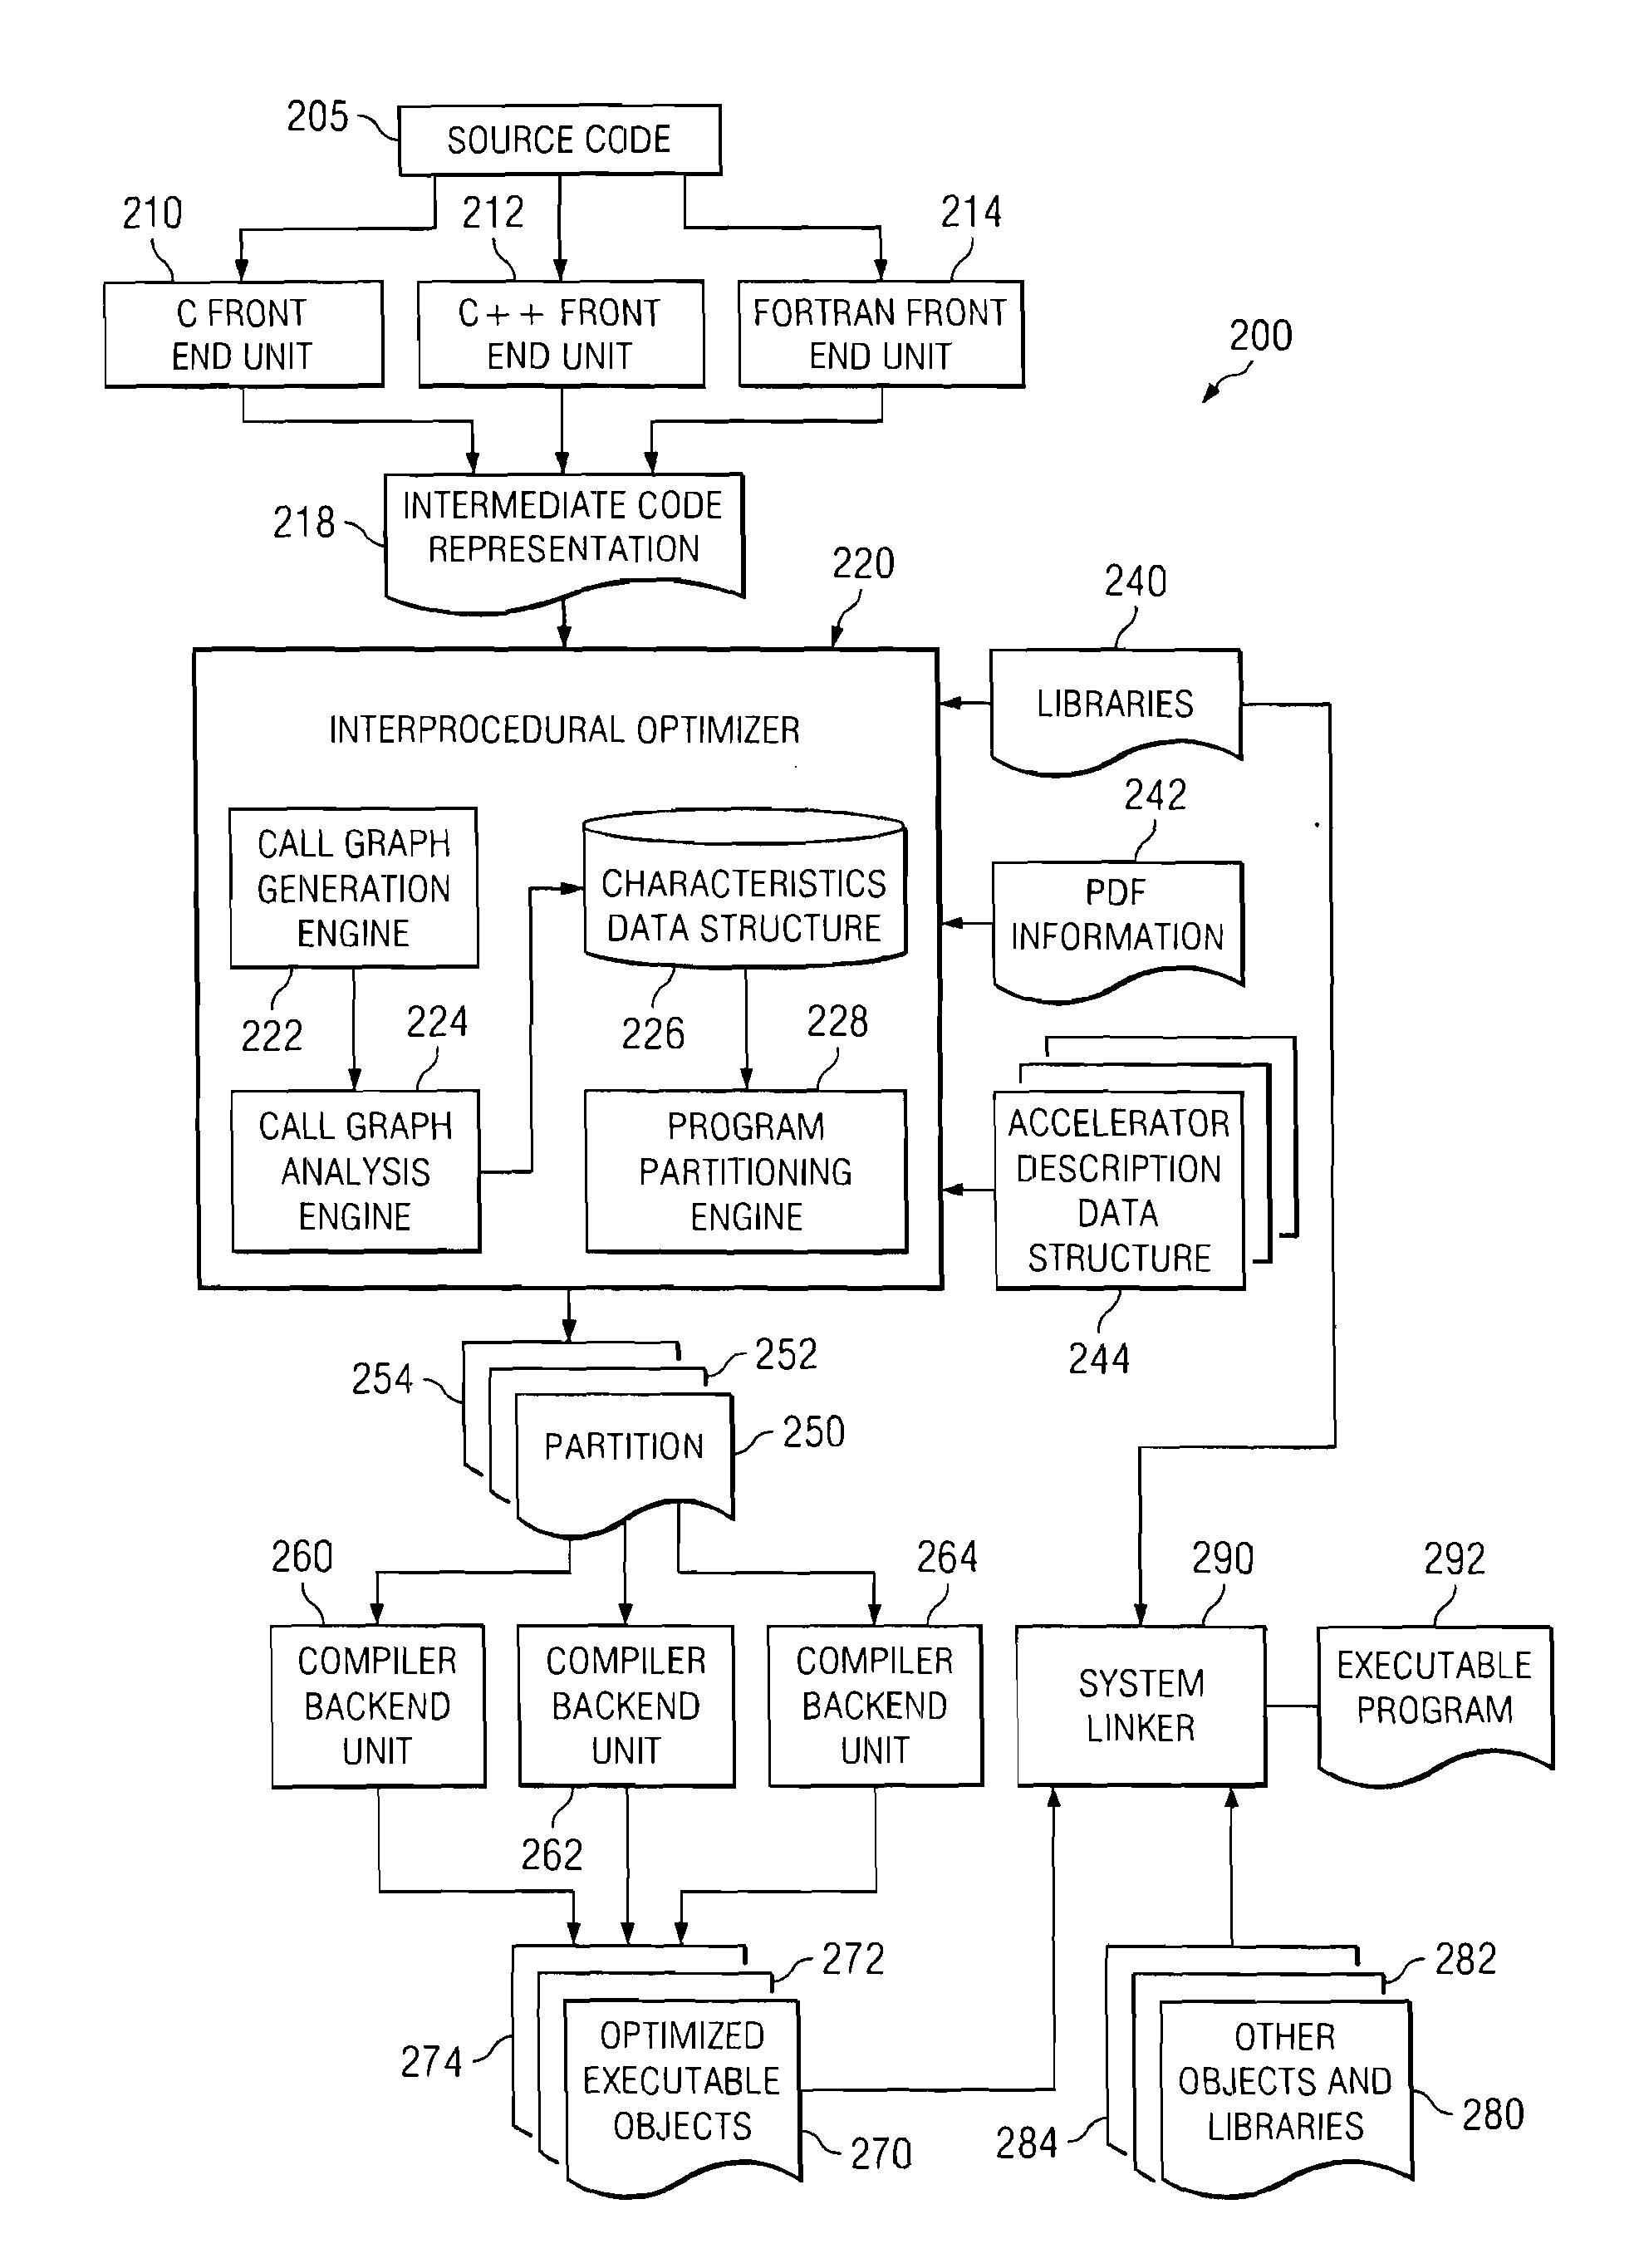 Apparatus and Method for Partitioning Programs Between a General Purpose Core and One or More Accelerators